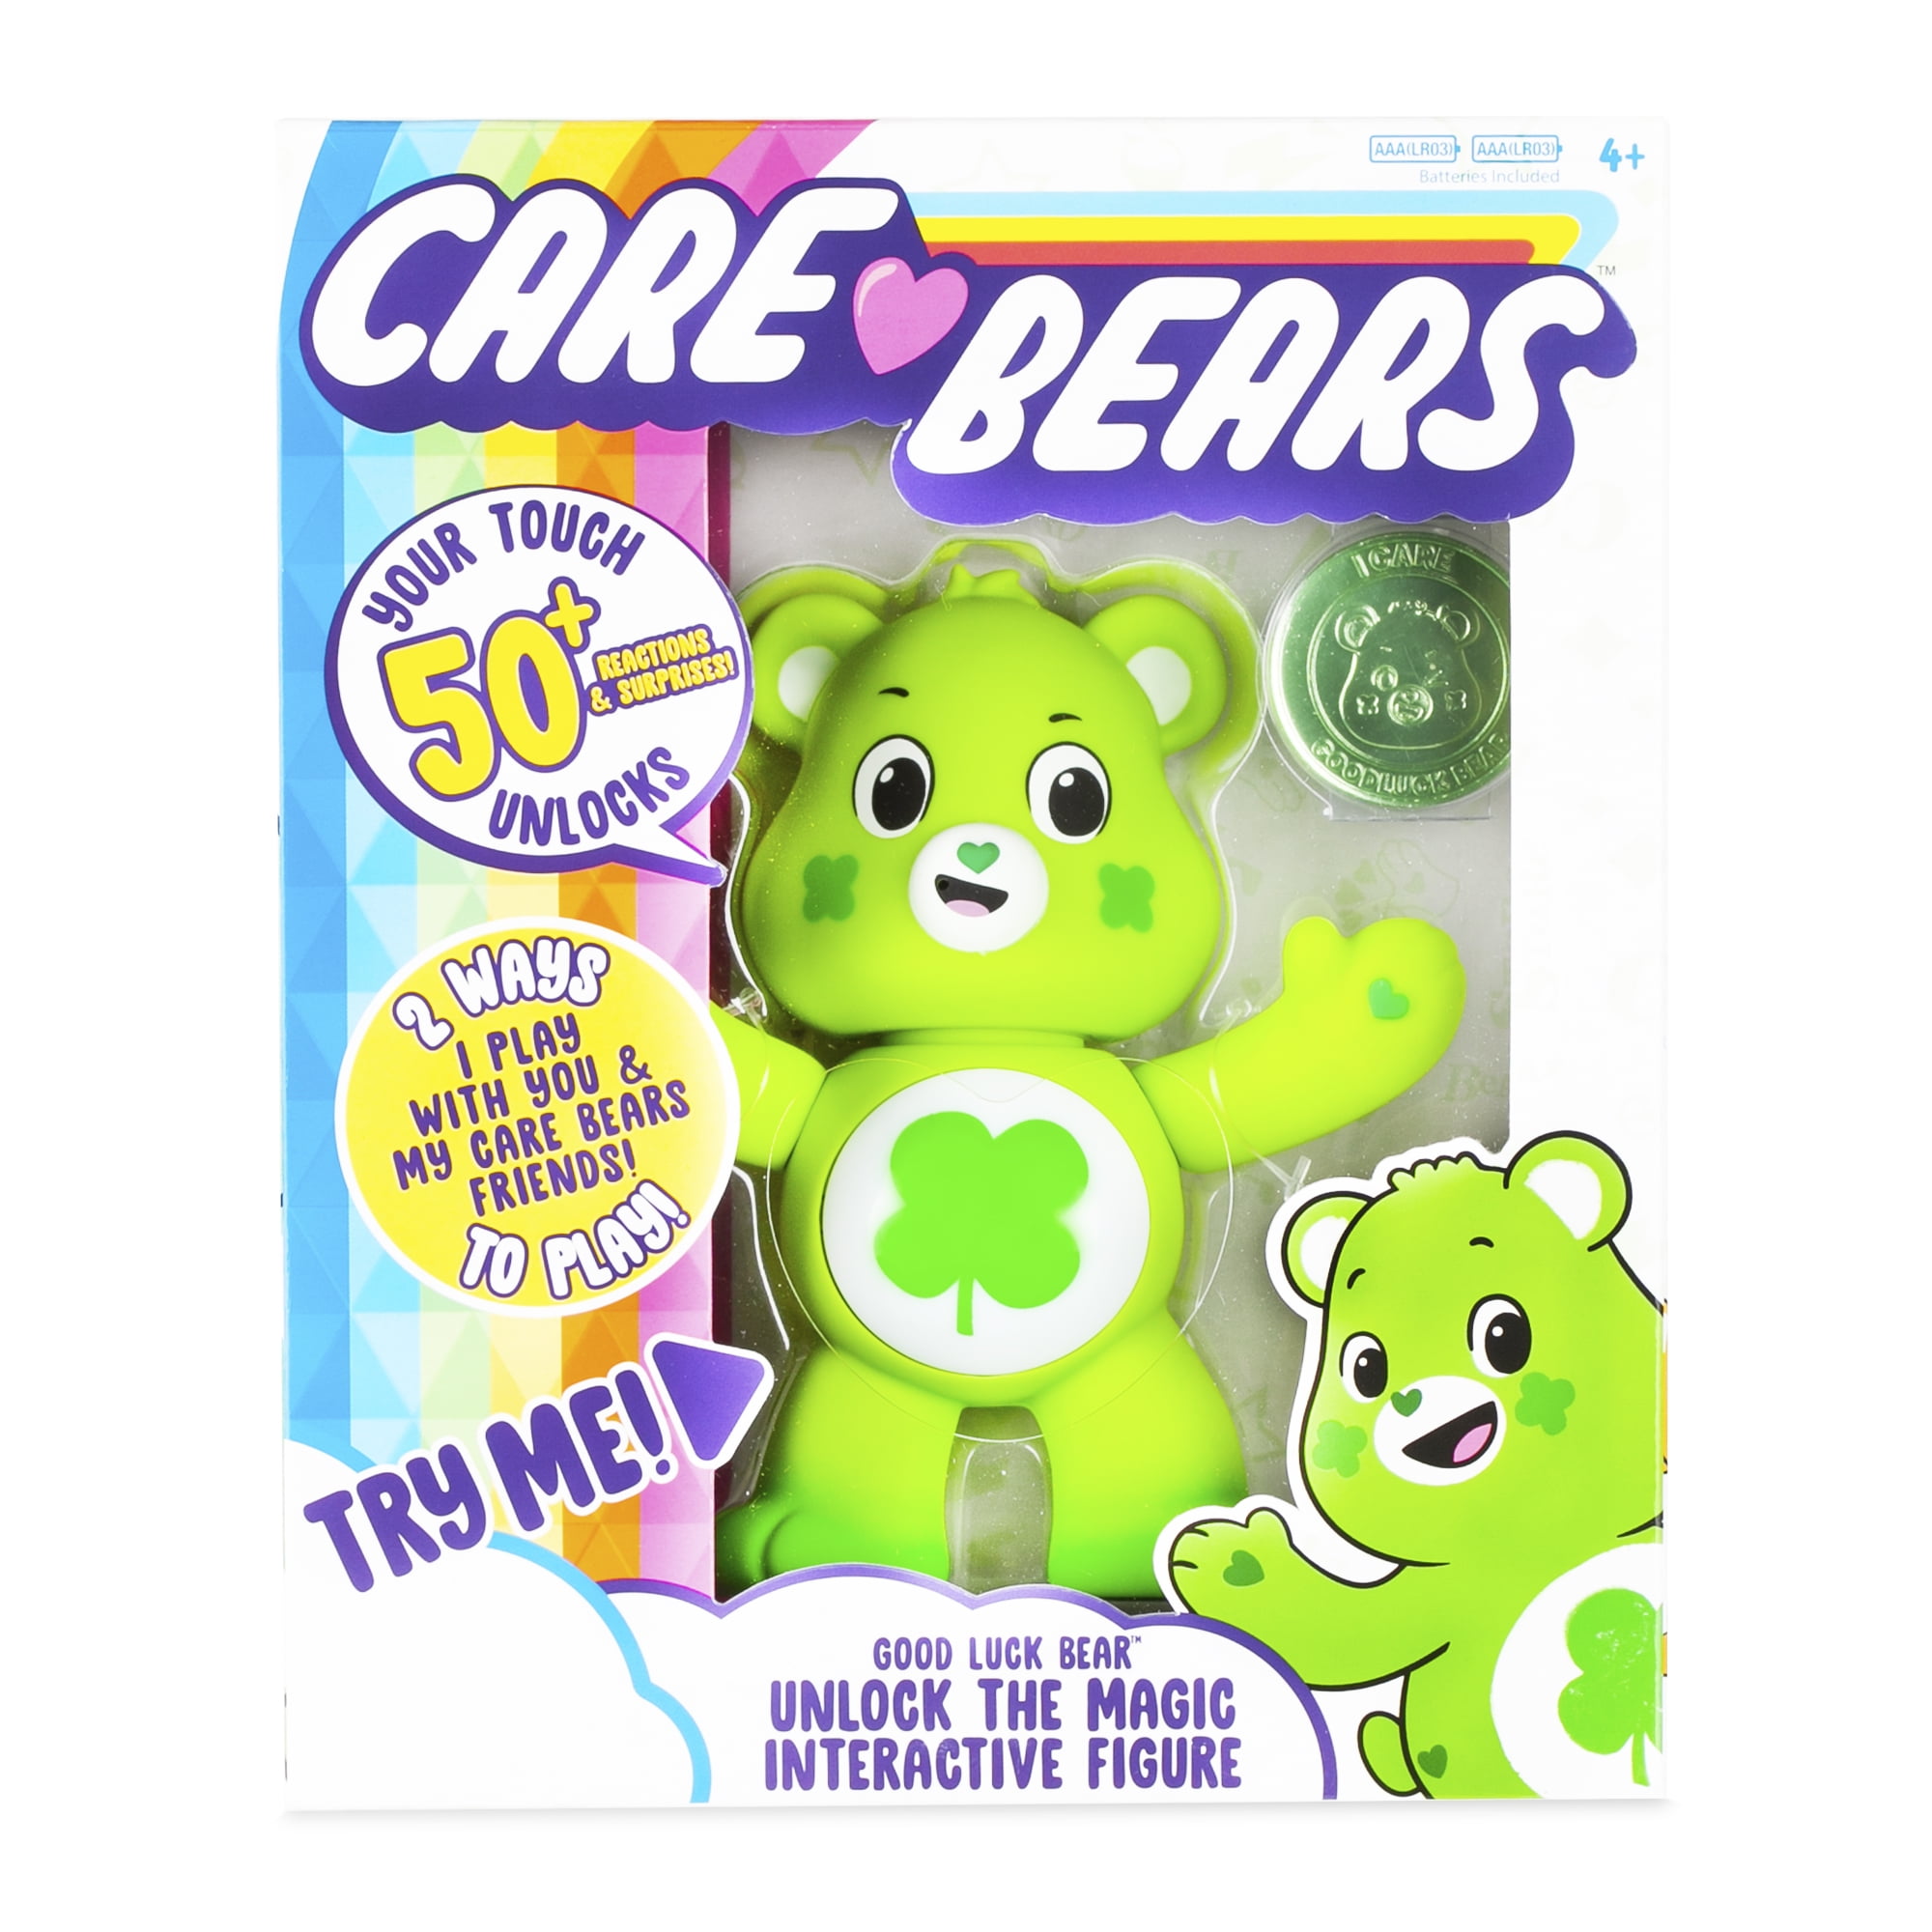 Details about   Care Bears Share Bear Interactive Figure 50 Reactions And Surprises 